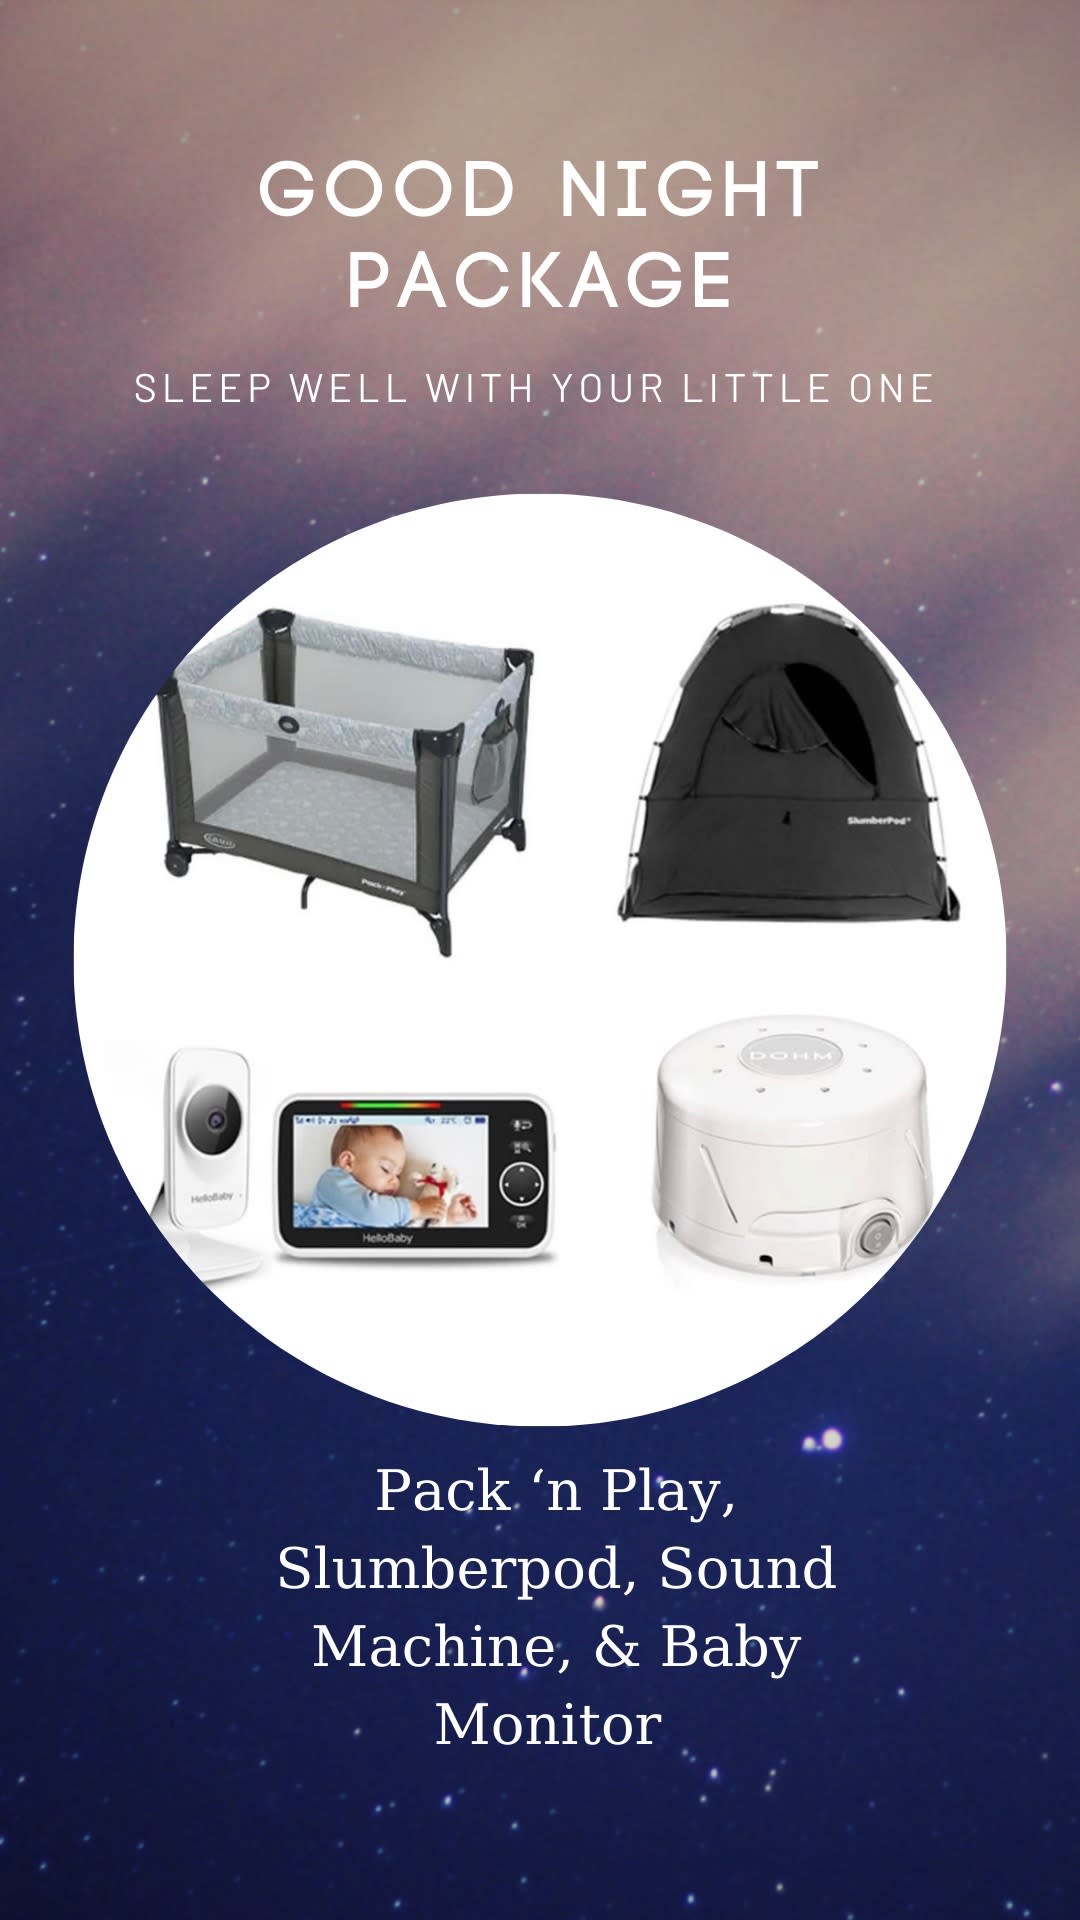 Rent Baby Gear INCLUDING Hellobaby Video Baby Monitor